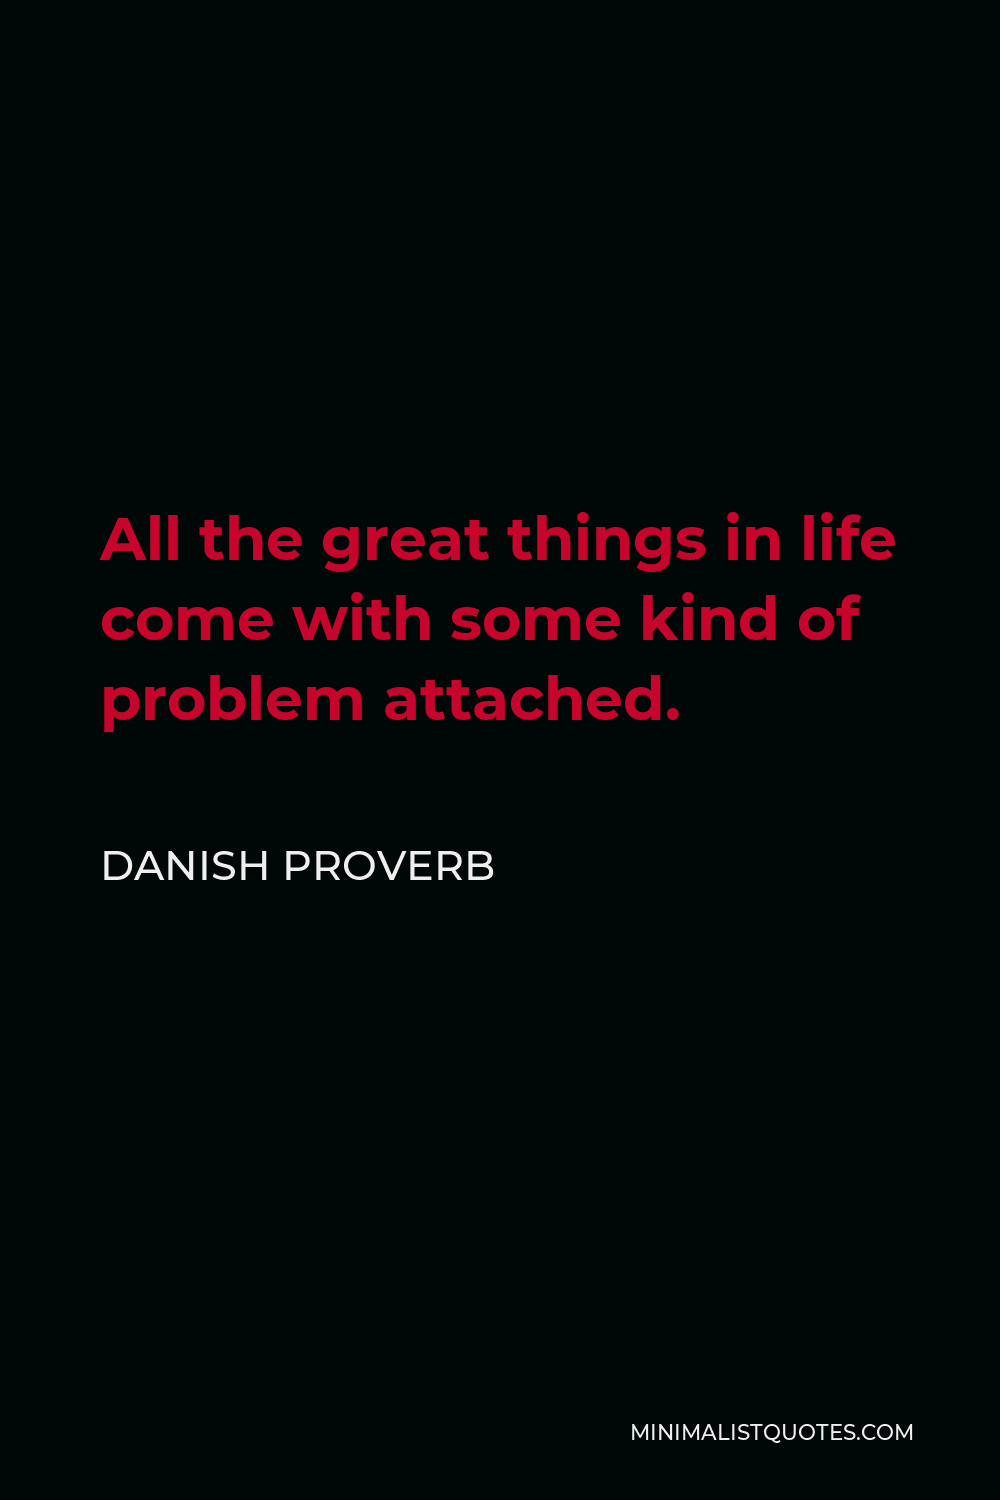 Danish Proverb Quote - All the great things in life come with some kind of problem attached.